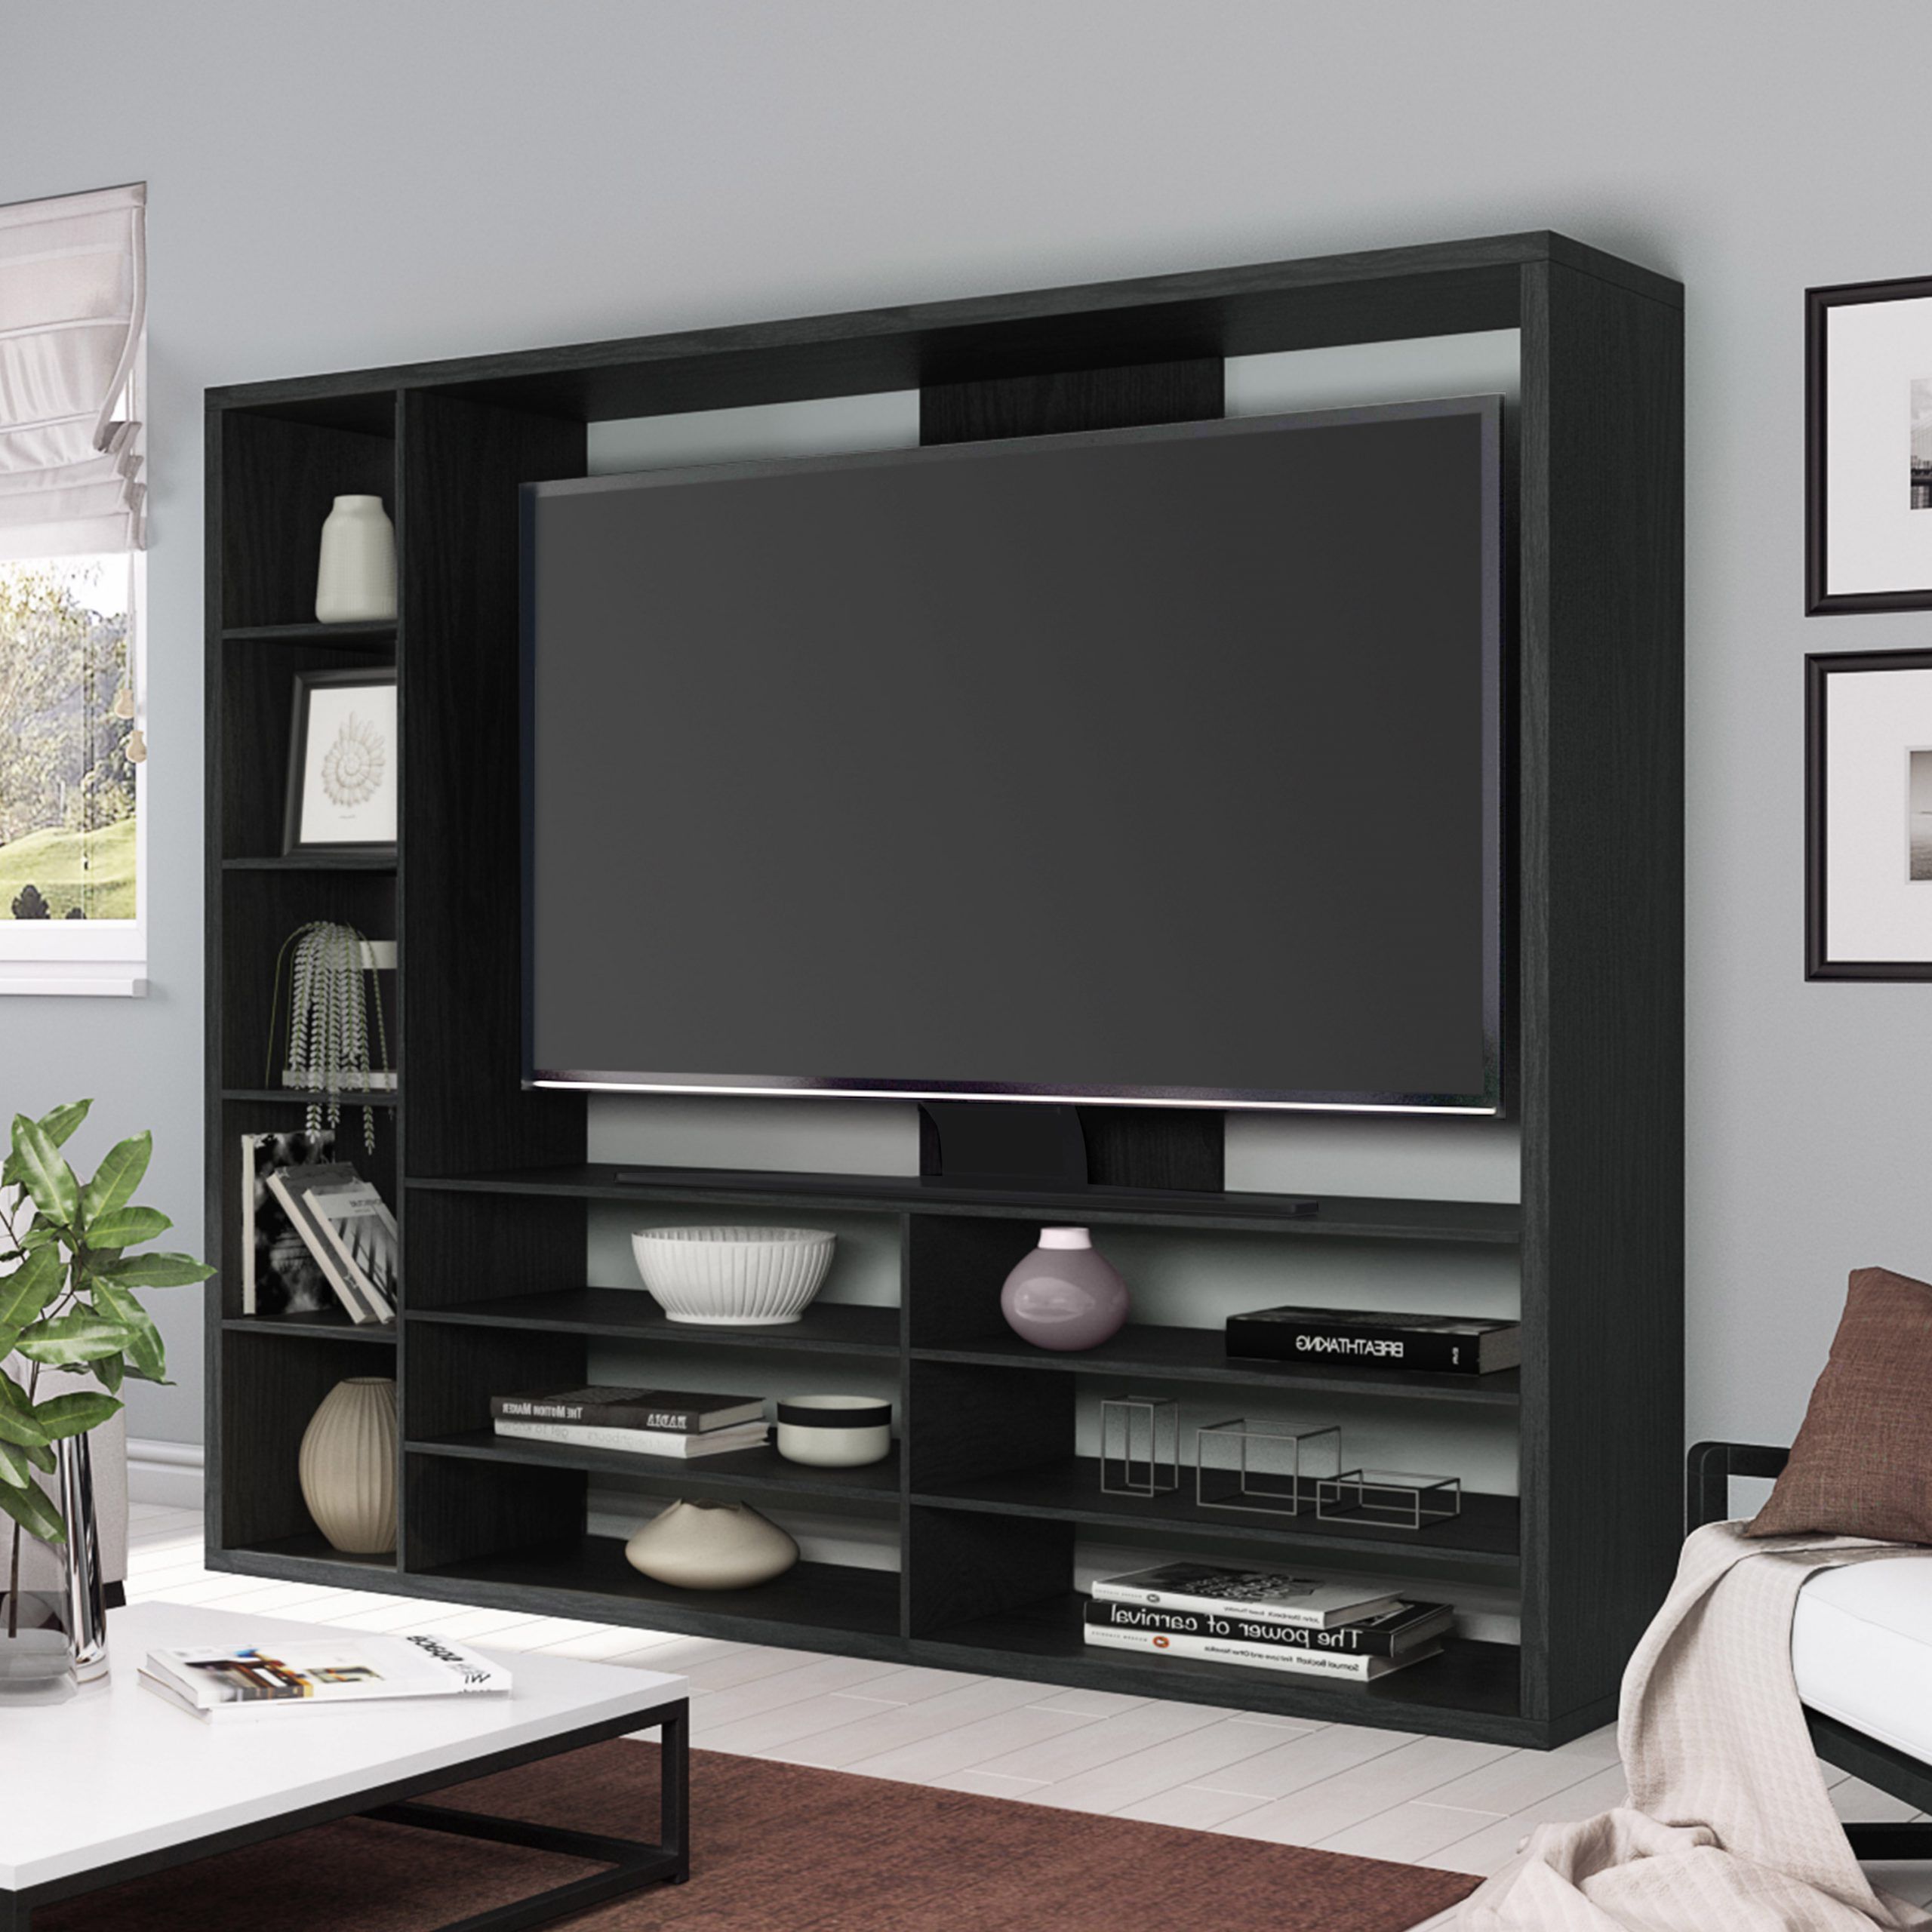 Entertainment Center Vs Tv Stand • Patio Ideas Intended For Carbon Extra Wide Tv Unit Stands (View 6 of 20)